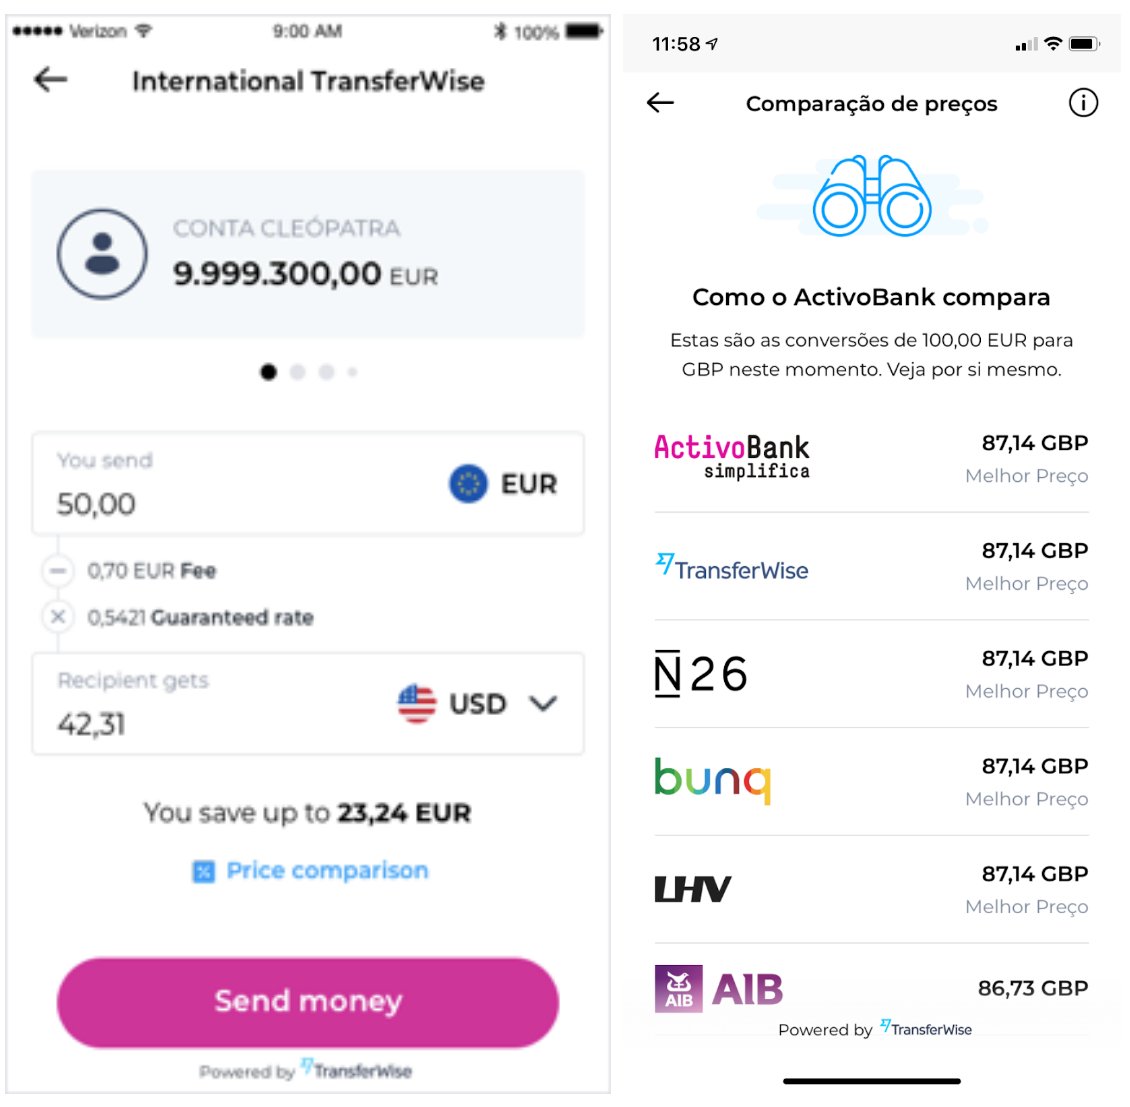 15/ Olá Our integration with  @Activo_Bank has brought fast, cheap and transparent transfers to a Portuguese bank. Fun fact: Activo’s is the first bank to integrate with us to build our comparison table into their app.  If only more banks were this transparent.